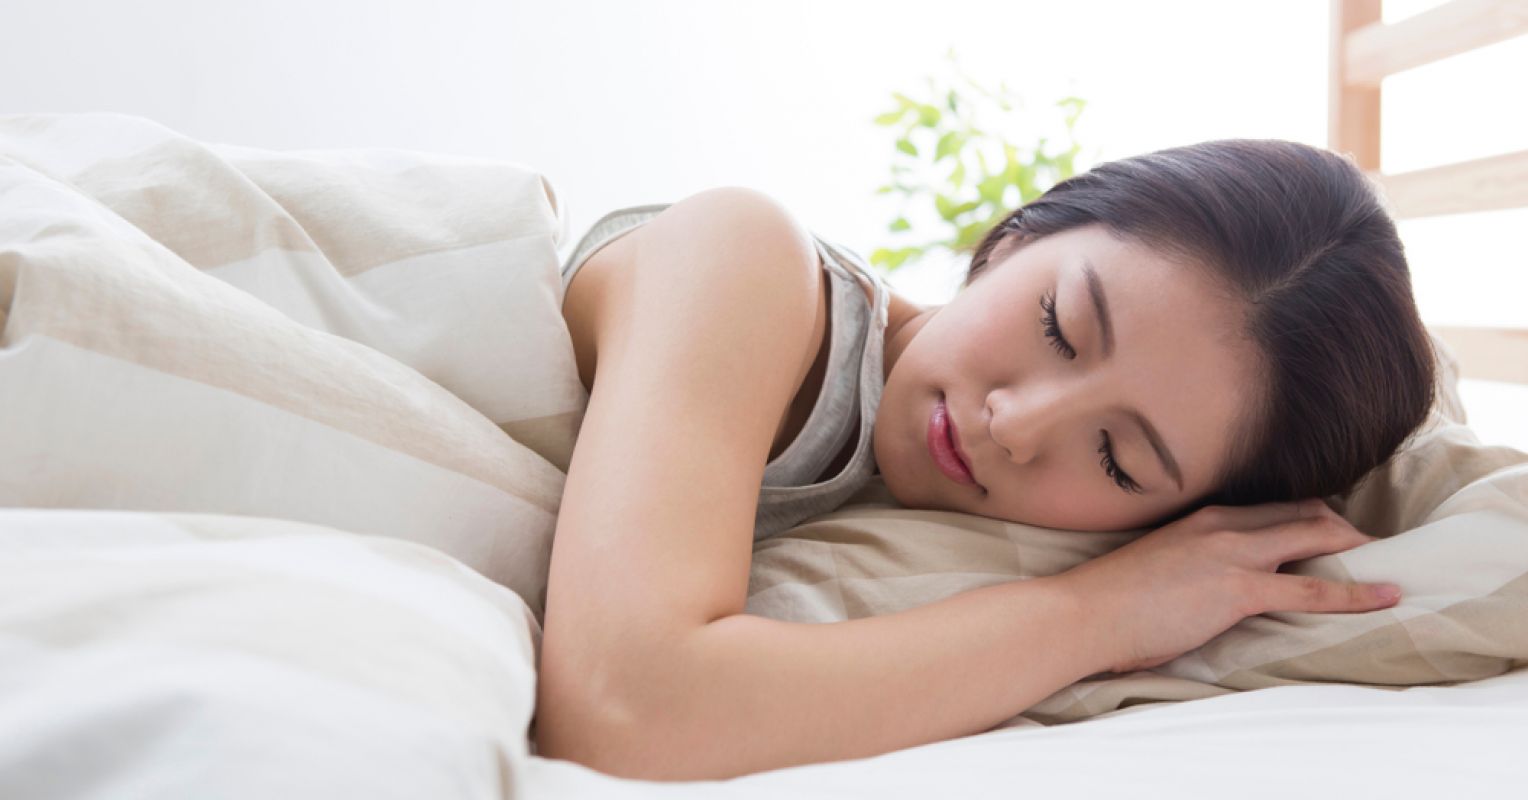 Weighted Blankets Can Help with Insomnia | Psychology Today